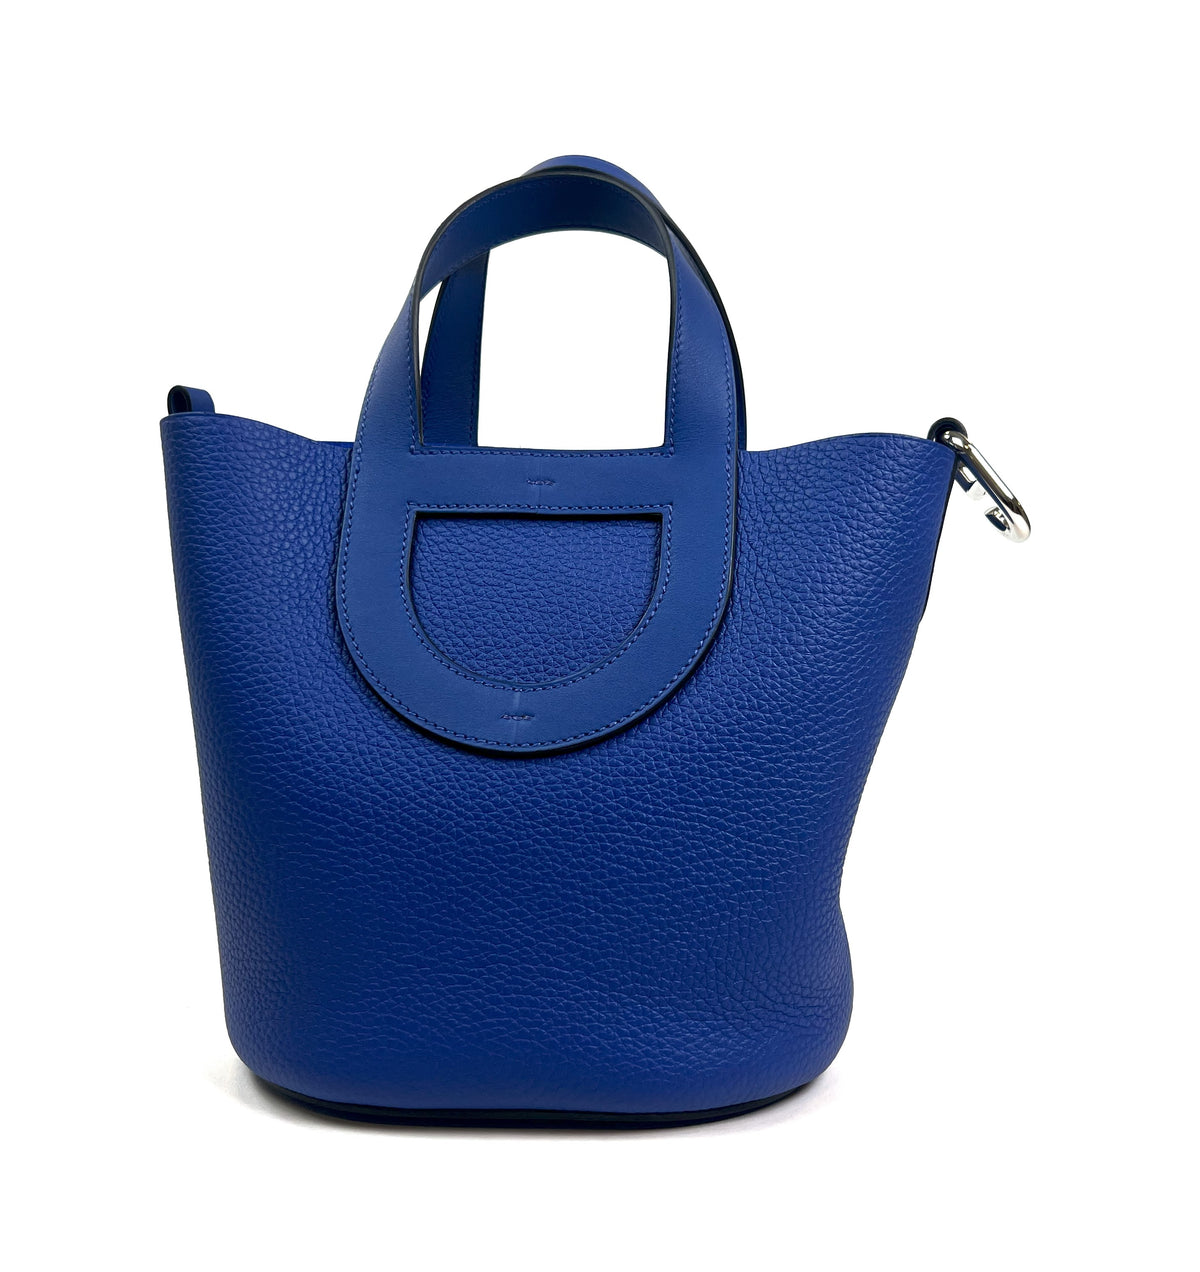 Excellent Pre-Loved Electric Blue Grained Leather Soft Open Tote Bag.(back)